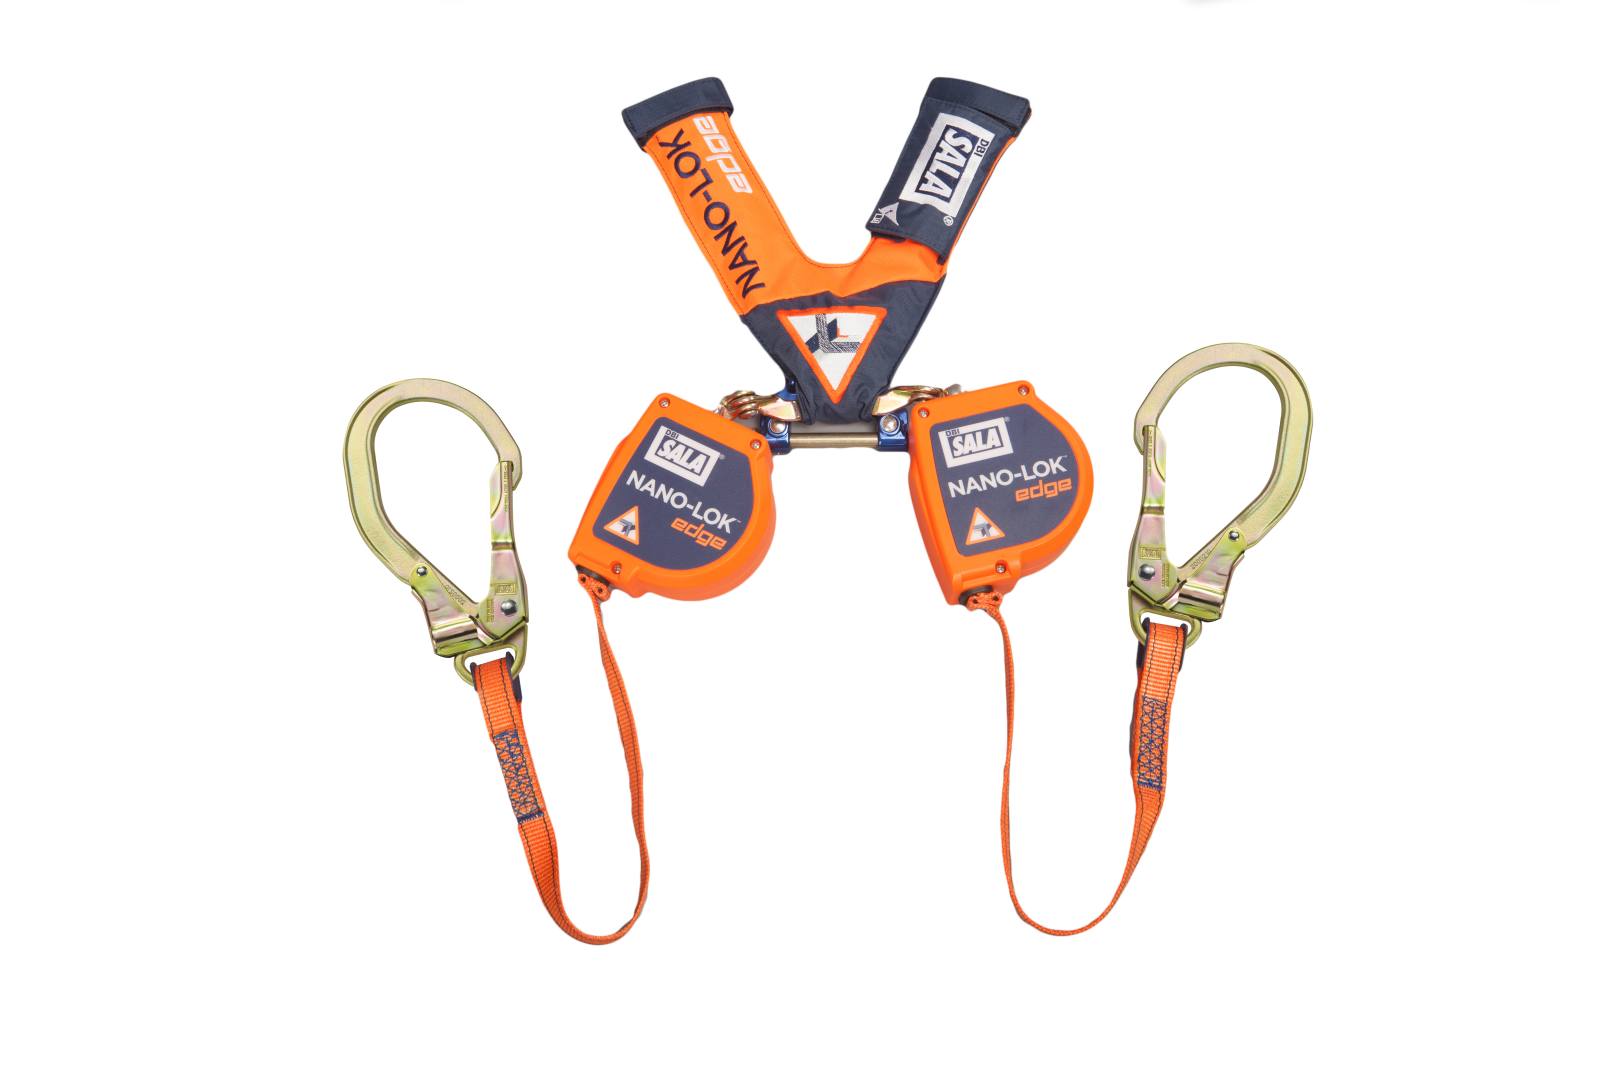 3M DBI-SALA Nano-Lok Edge twin retractable type fall arrester, edge-tested, length: 2.5 m, Dyneema webbing 20 mm, Trilock webbing carabiner, 2 steel scaffold carabiners opening width 63 mm, 3M Connected Safety-ready RFID tag for inspection, 2.5 m